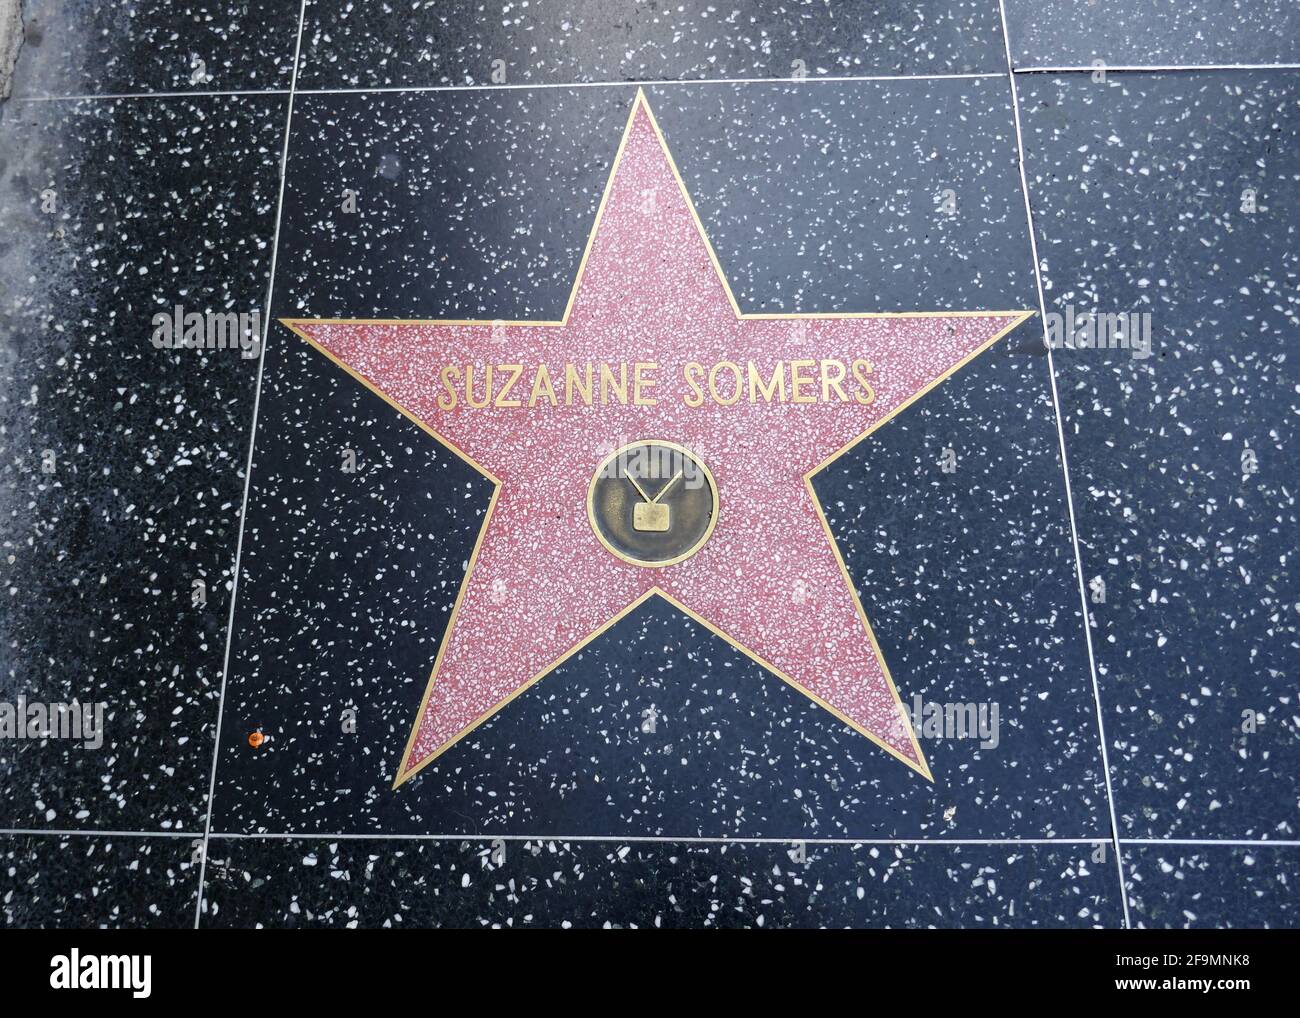 Hollywood, California, USA 17th April 2021 A general view of atmosphere of actress Suzanne Somers Star on the Hollywood Walk of Fame on April 17, 2021 in Hollywood, California, USA. Photo by Barry King/Alamy Stock Photo Stock Photo